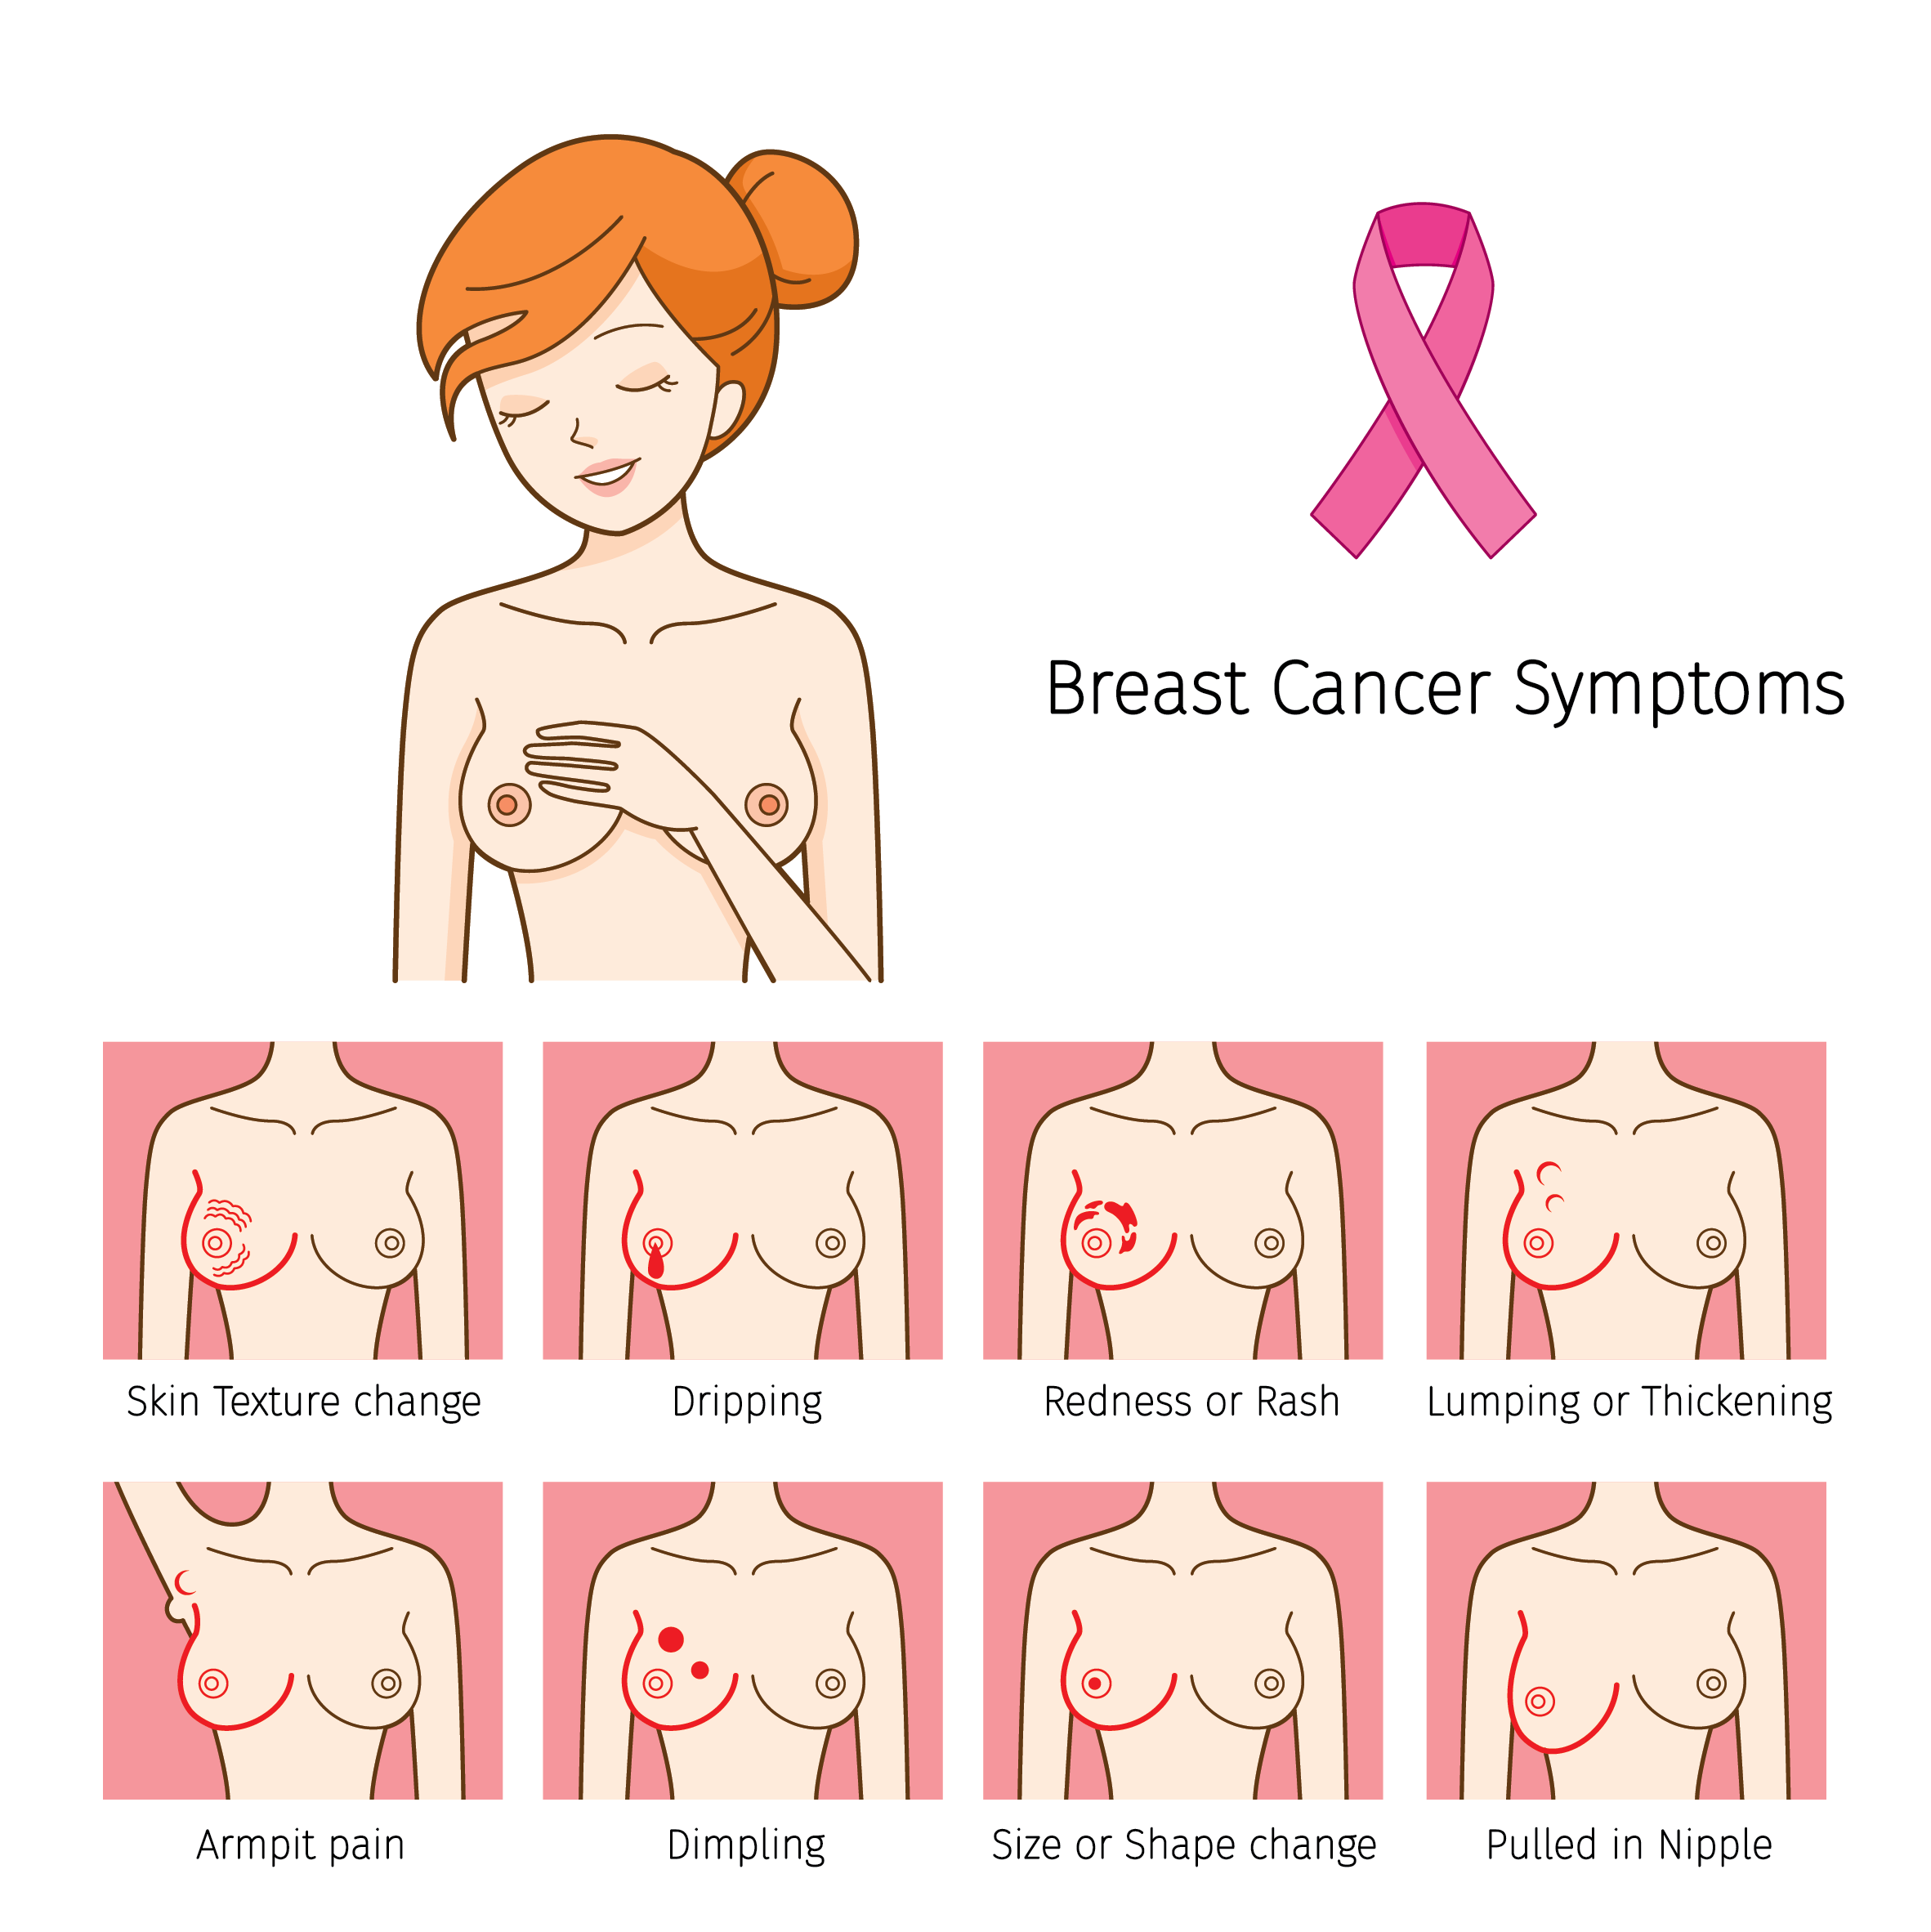 common breast cancer symptoms illustrated